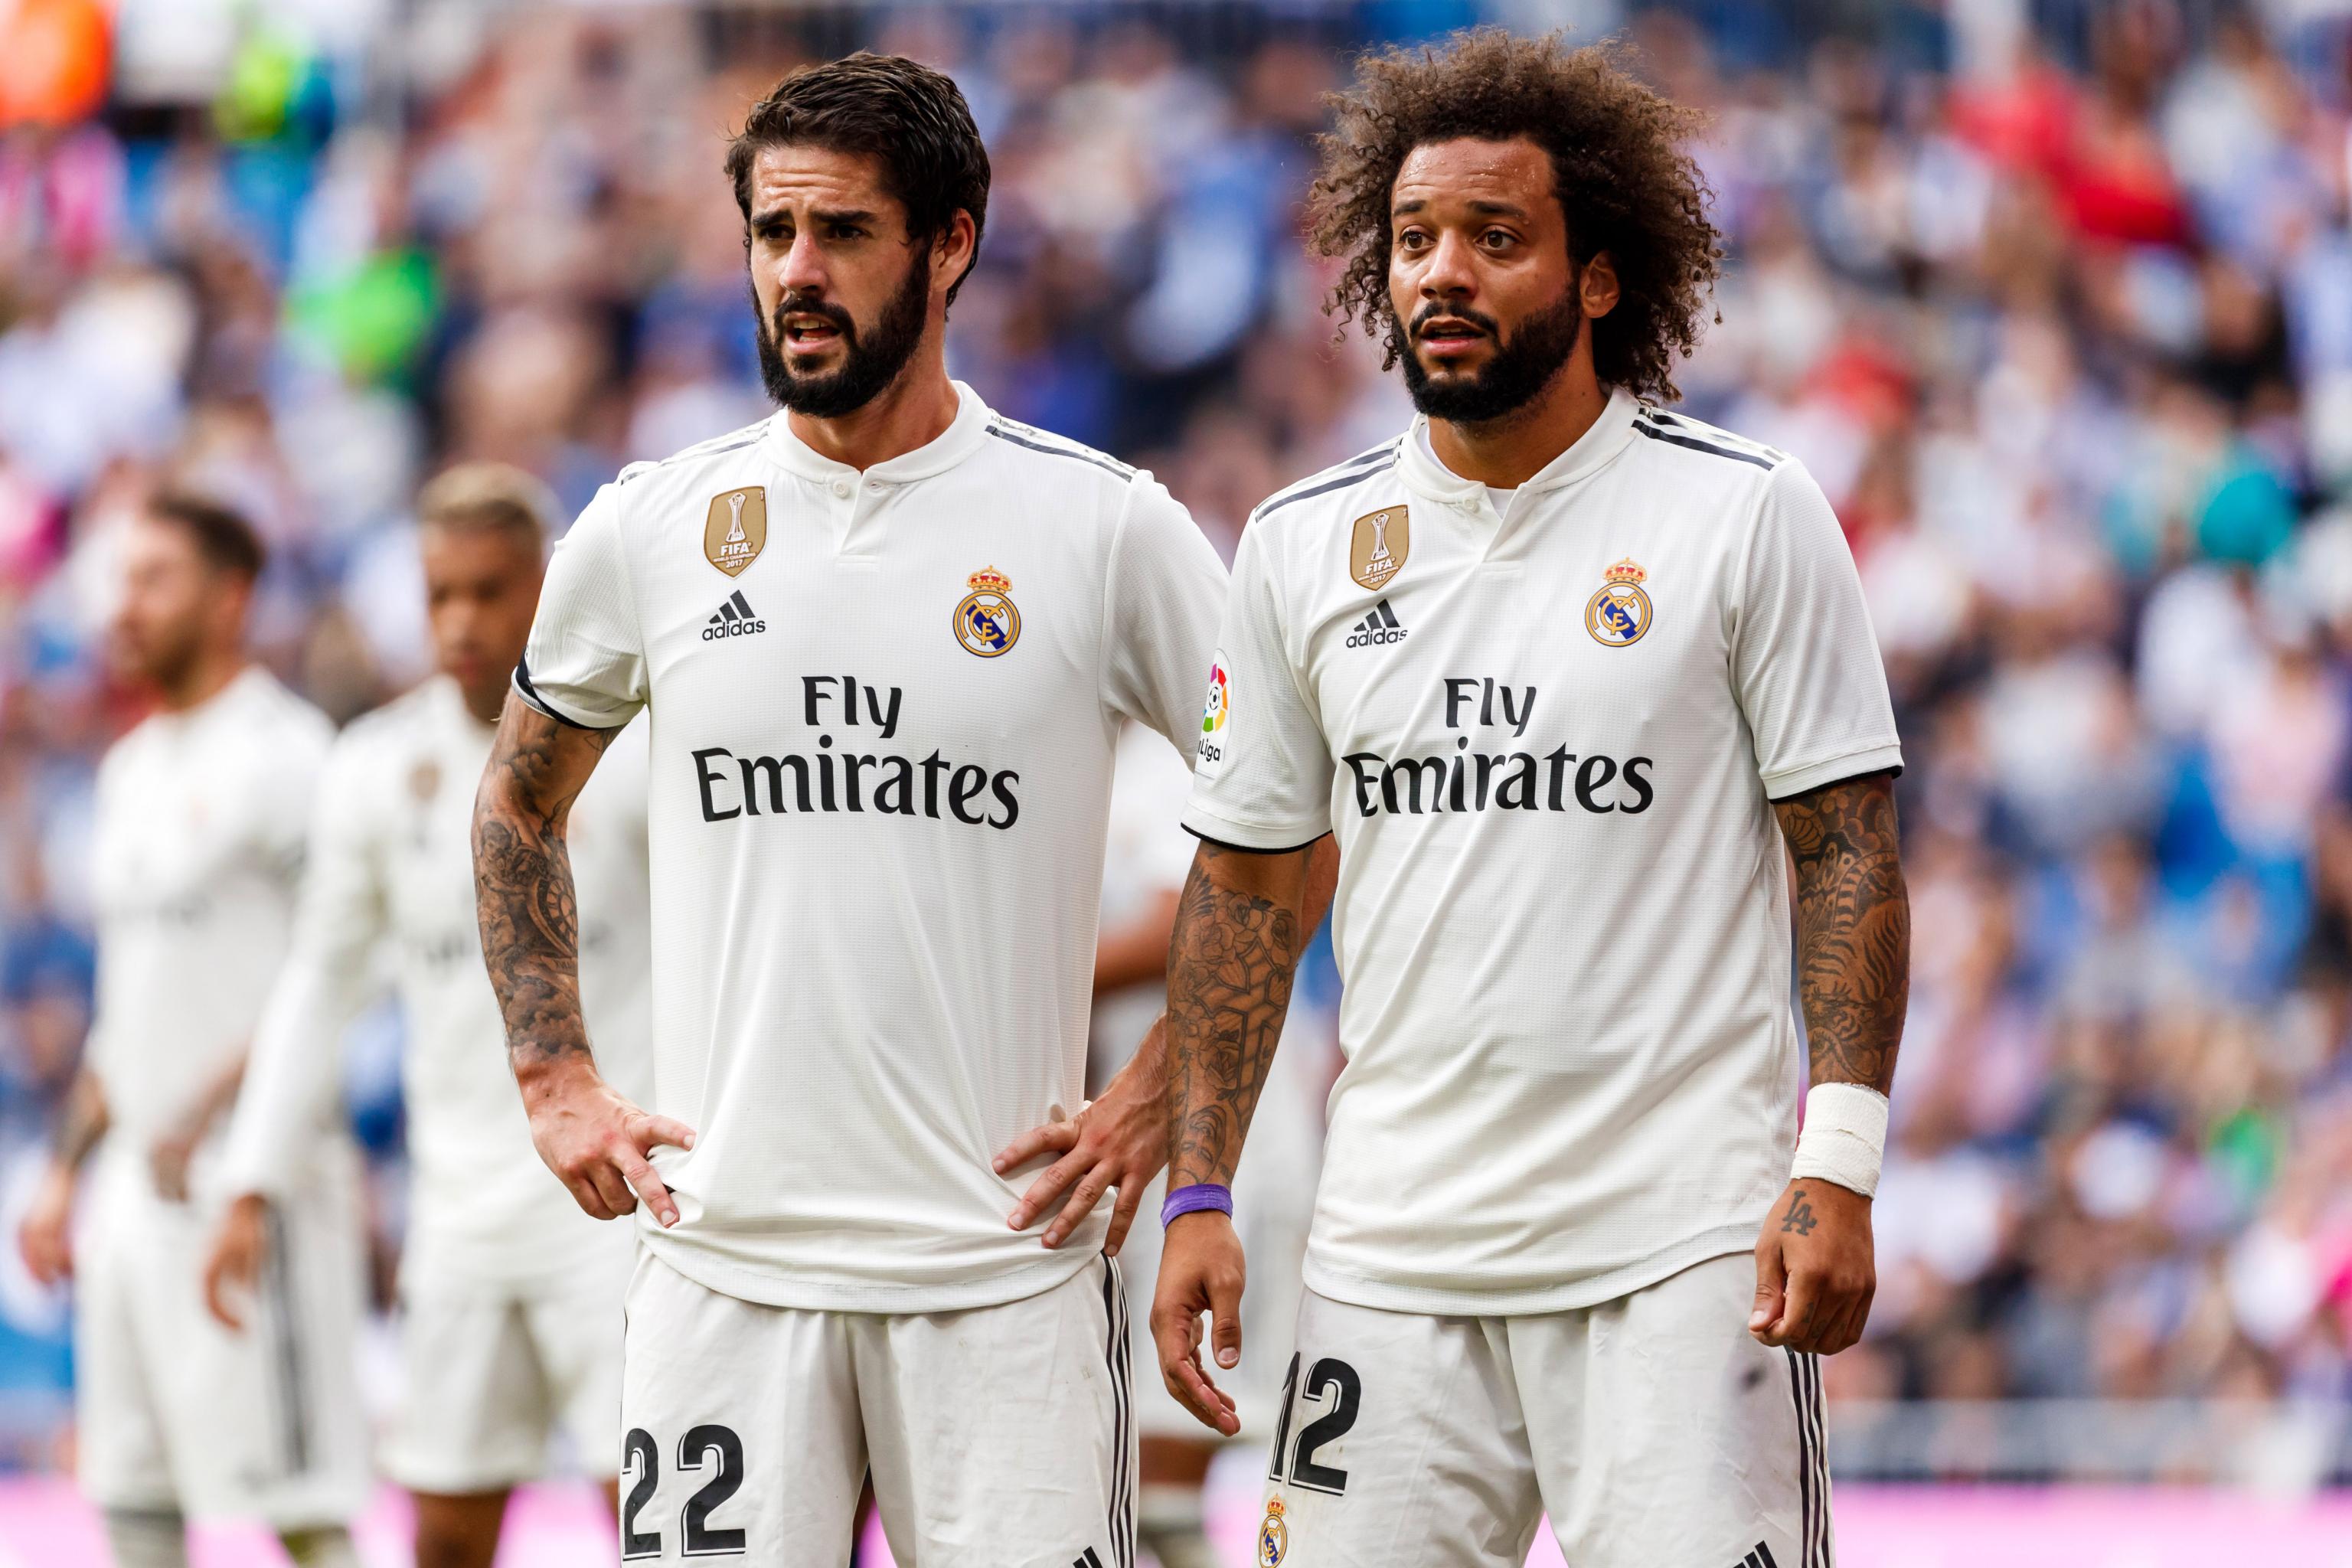 Real Madrid Outcast Isco Has Most Talent of Any Player at Club, Says Marcelo | Bleacher Report | Latest News, Videos and Highlights